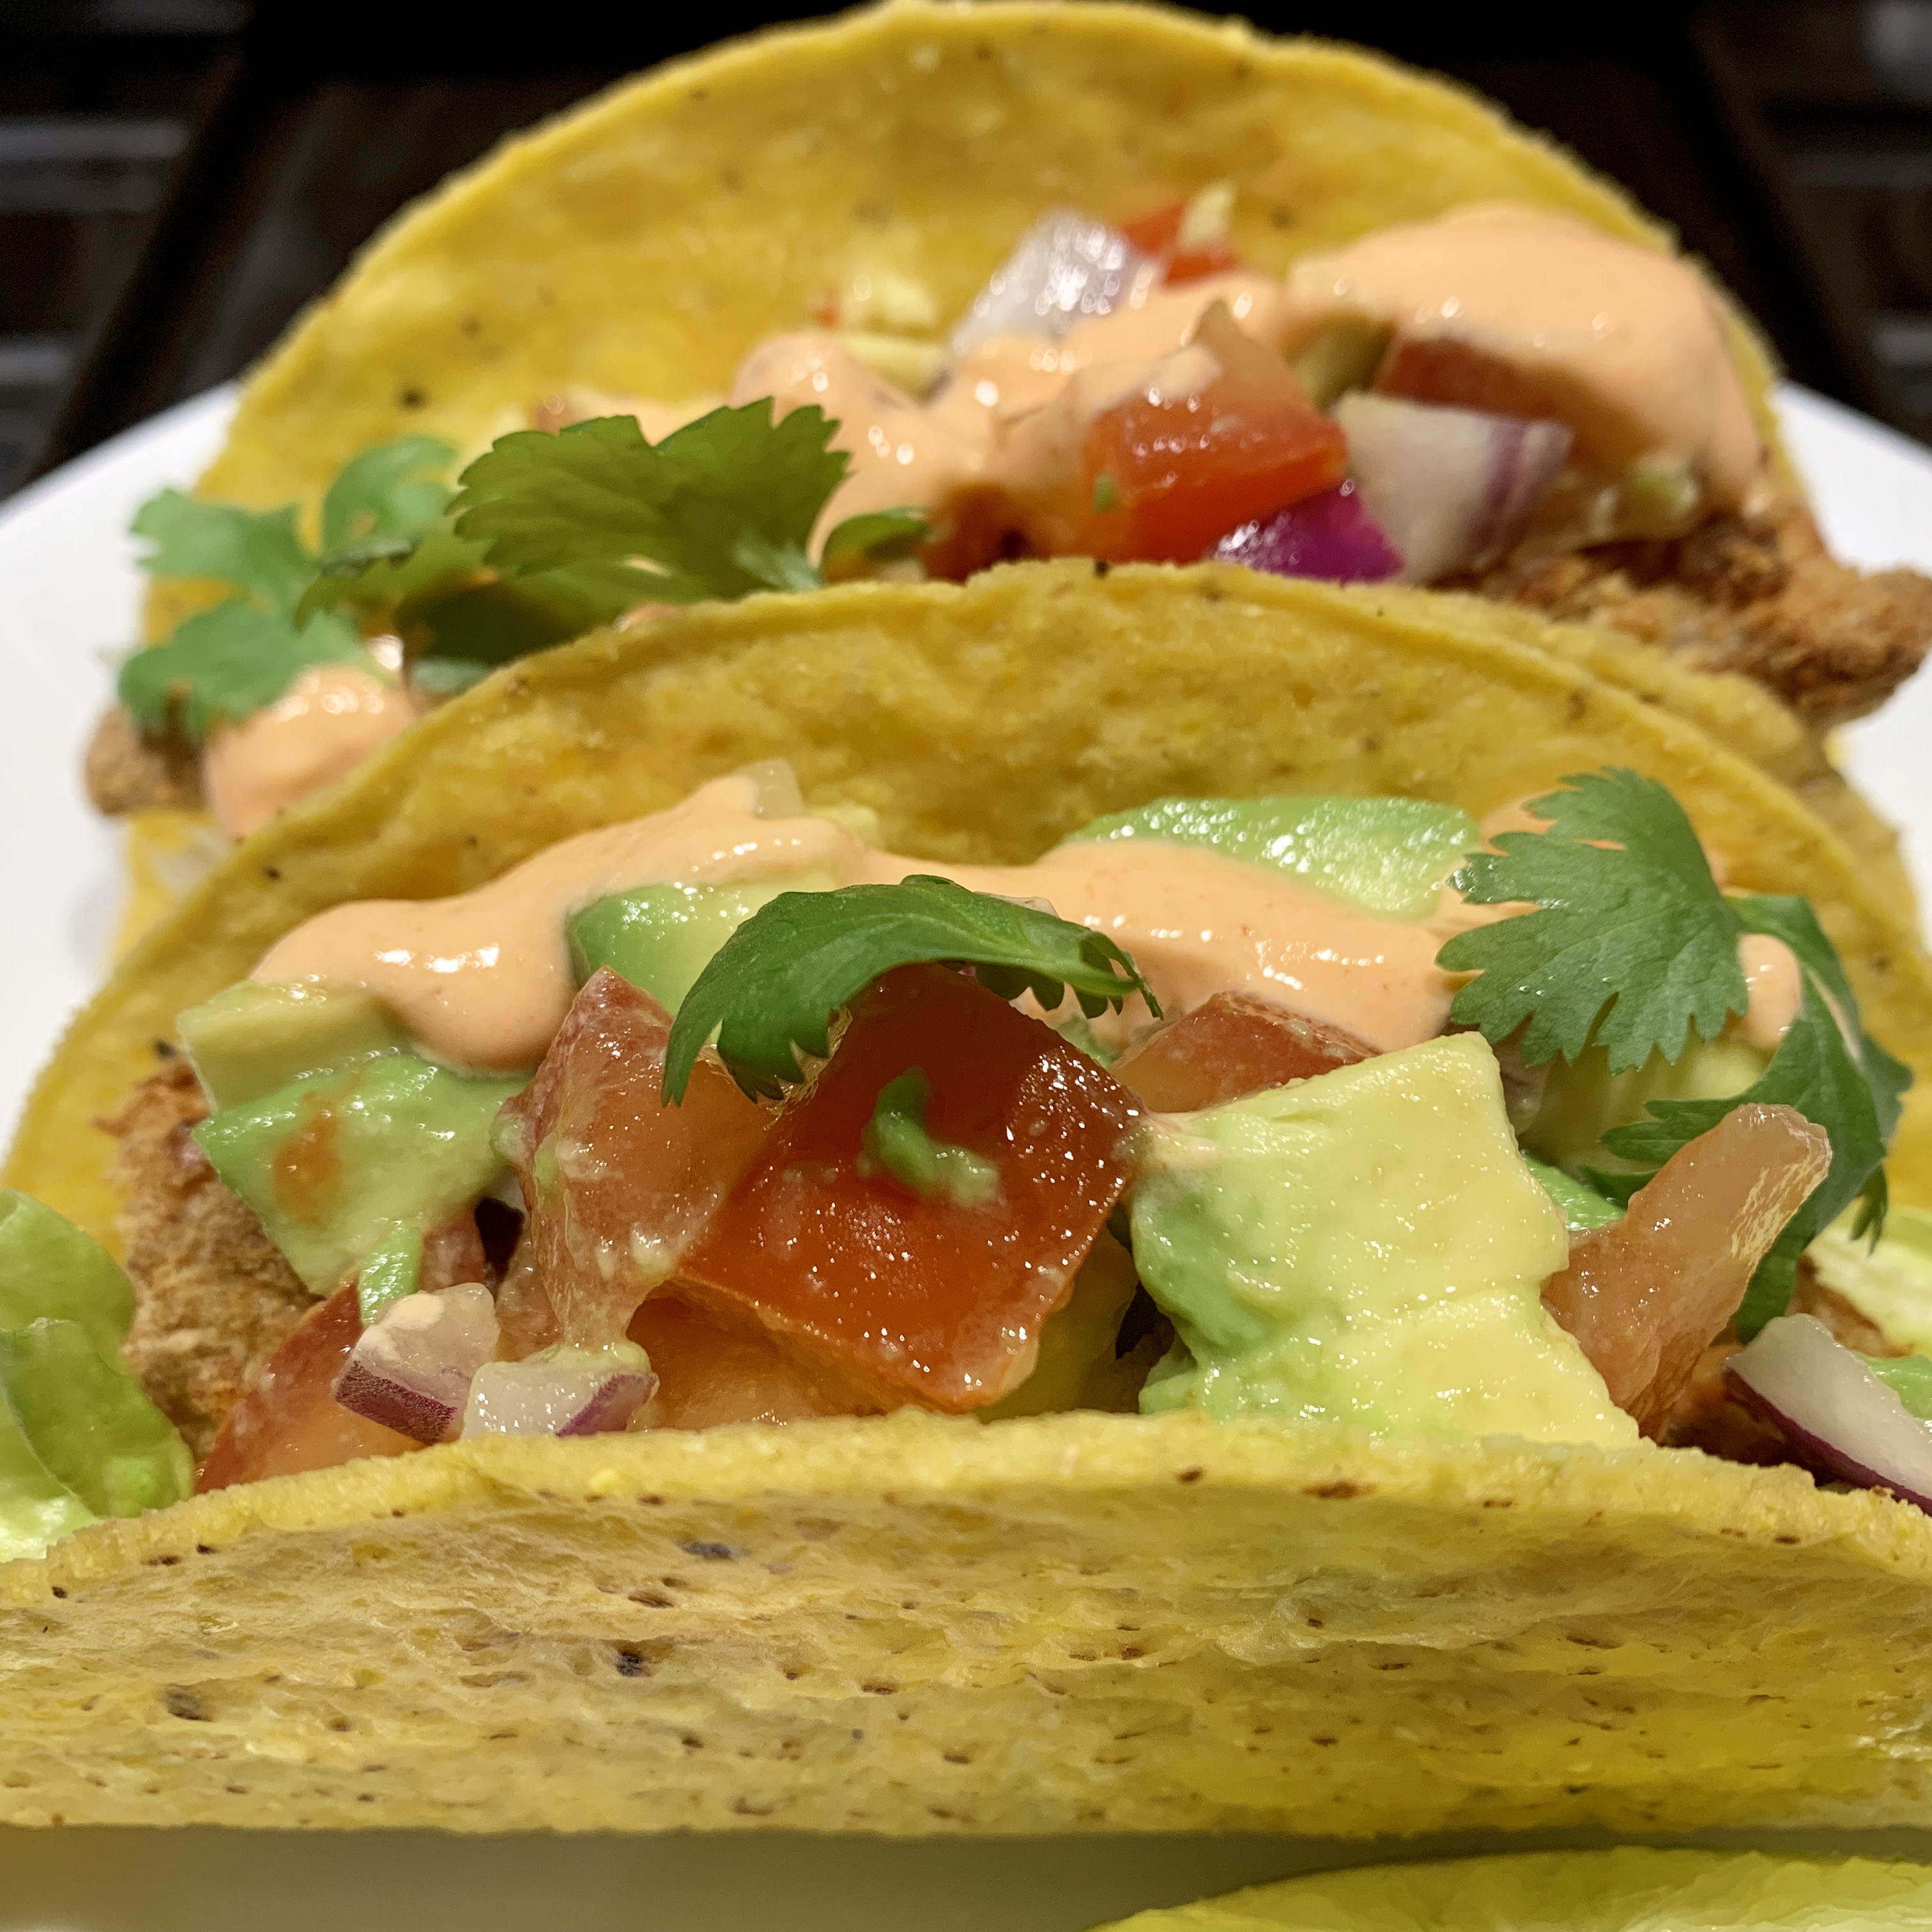 Get Your Healthy On with These Spicy Air Fryer Fish Tacos! - My Loving Oven